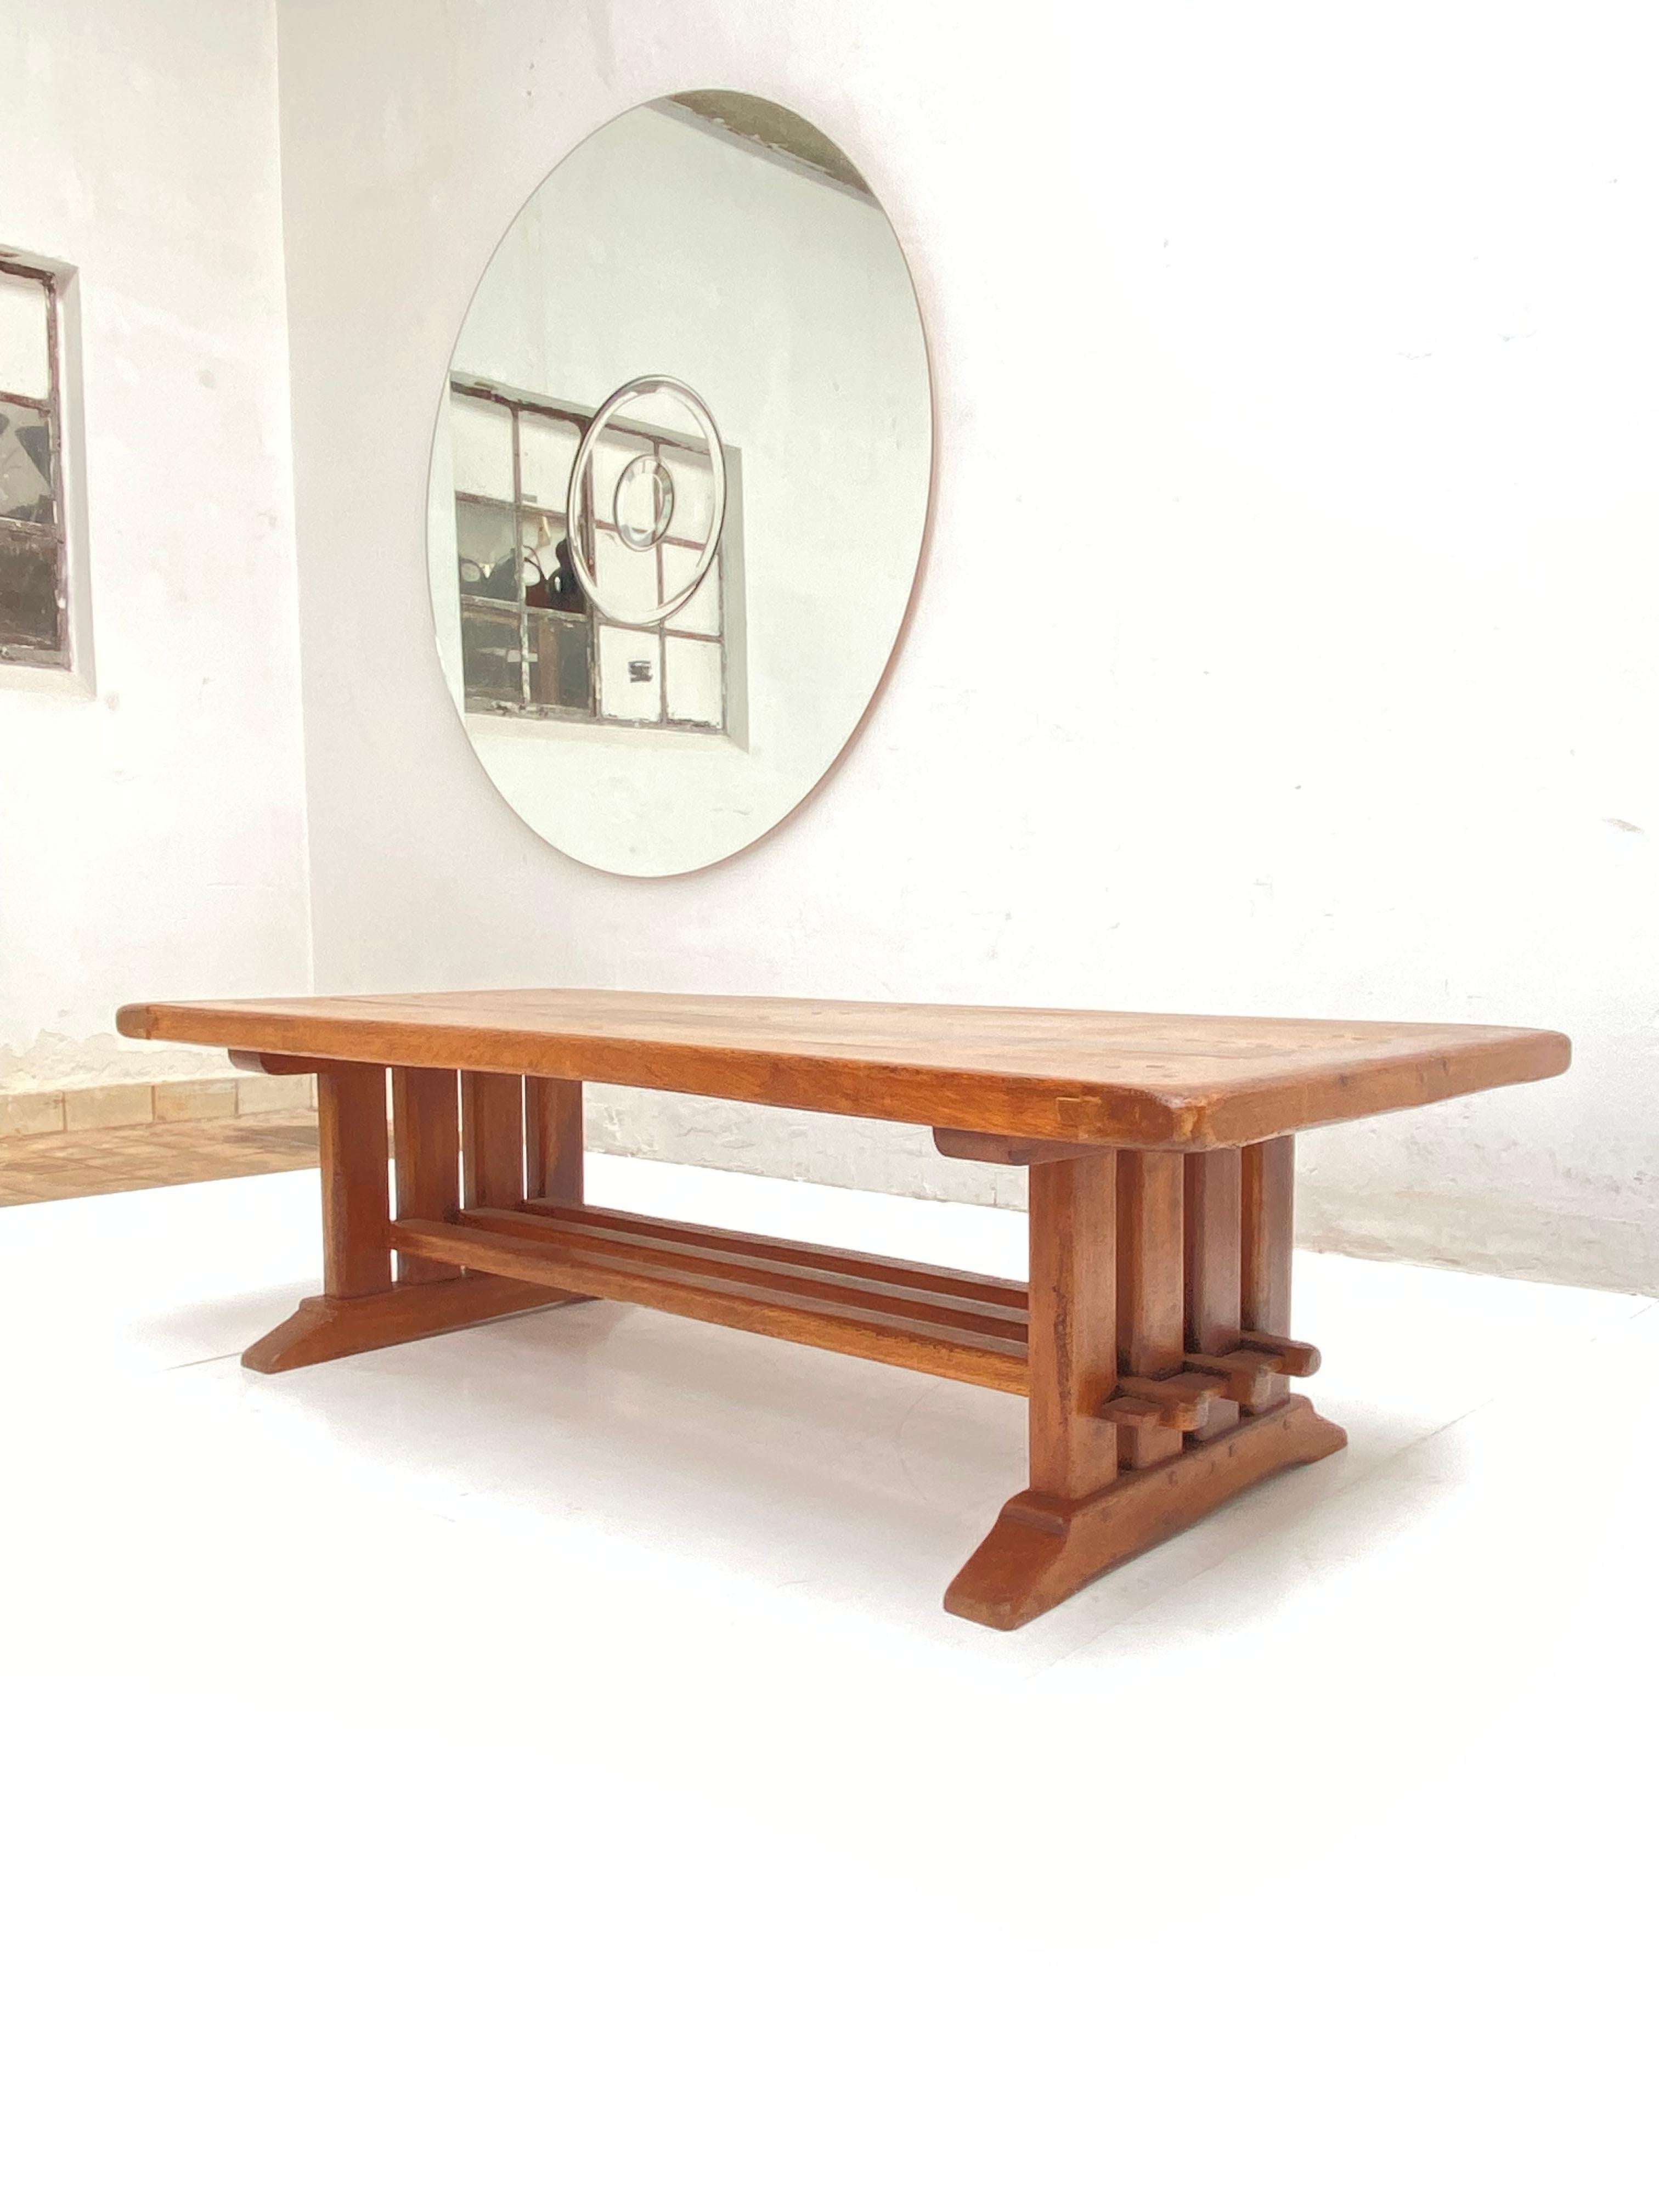 Solid Rustic Oak coffee table from the 1970's 

Handmade by a local carpenter shop probably in Belgium or France 

Nice details in the construction and rustic details in the oak

Very sturdy construction so it can also be used as a large wide